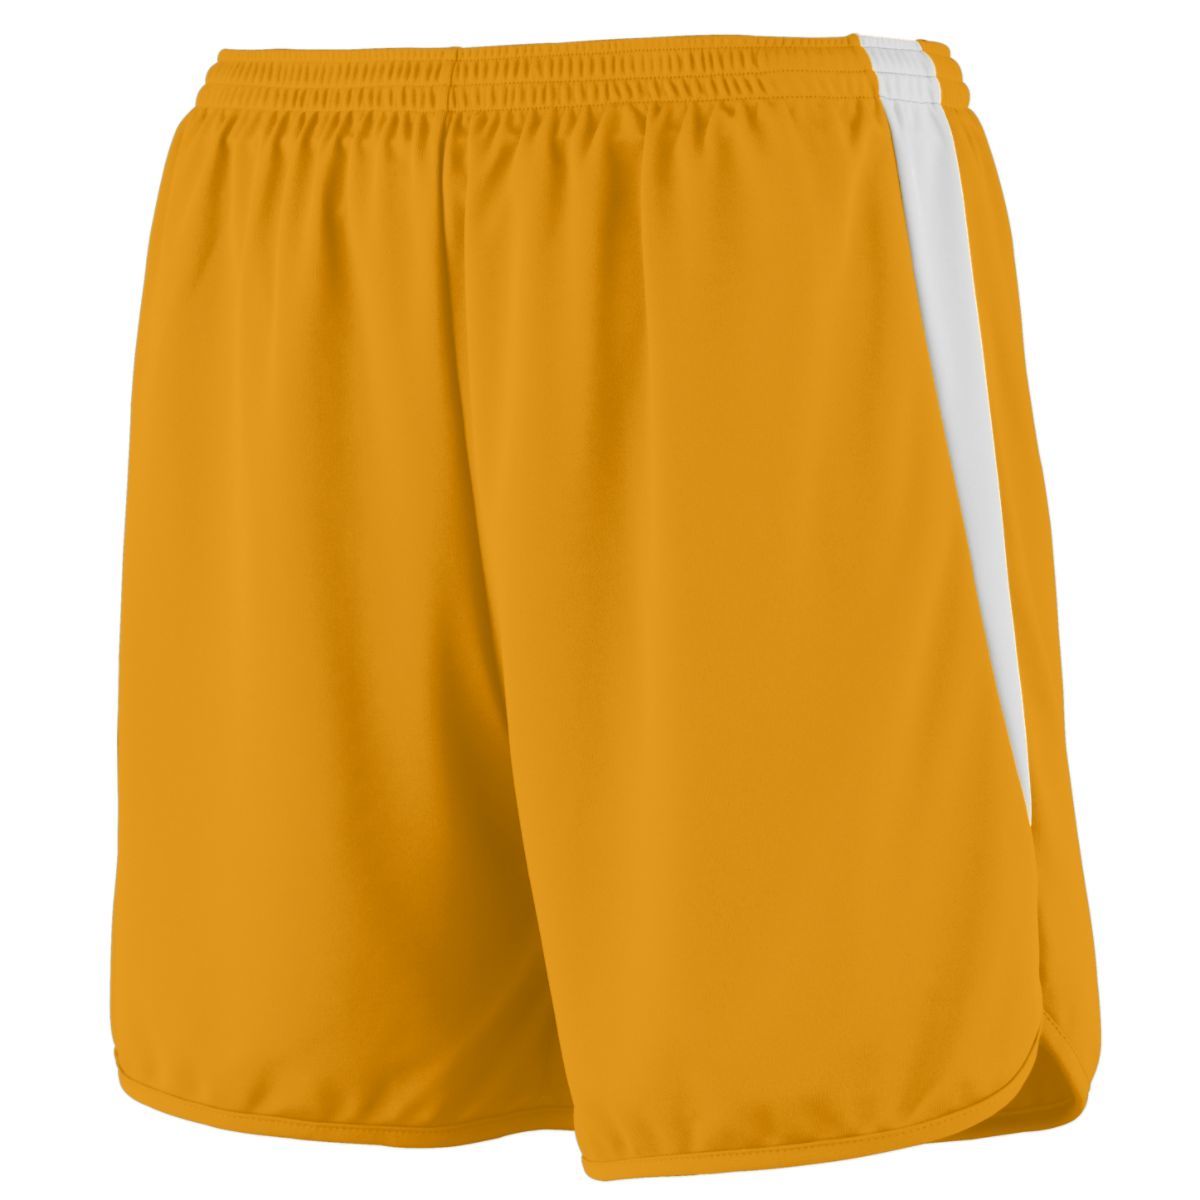 Augusta Sportswear Youth Rapidpace Track Shorts in Gold/White  -Part of the Youth, Youth-Shorts, Augusta-Products, Track-Field product lines at KanaleyCreations.com